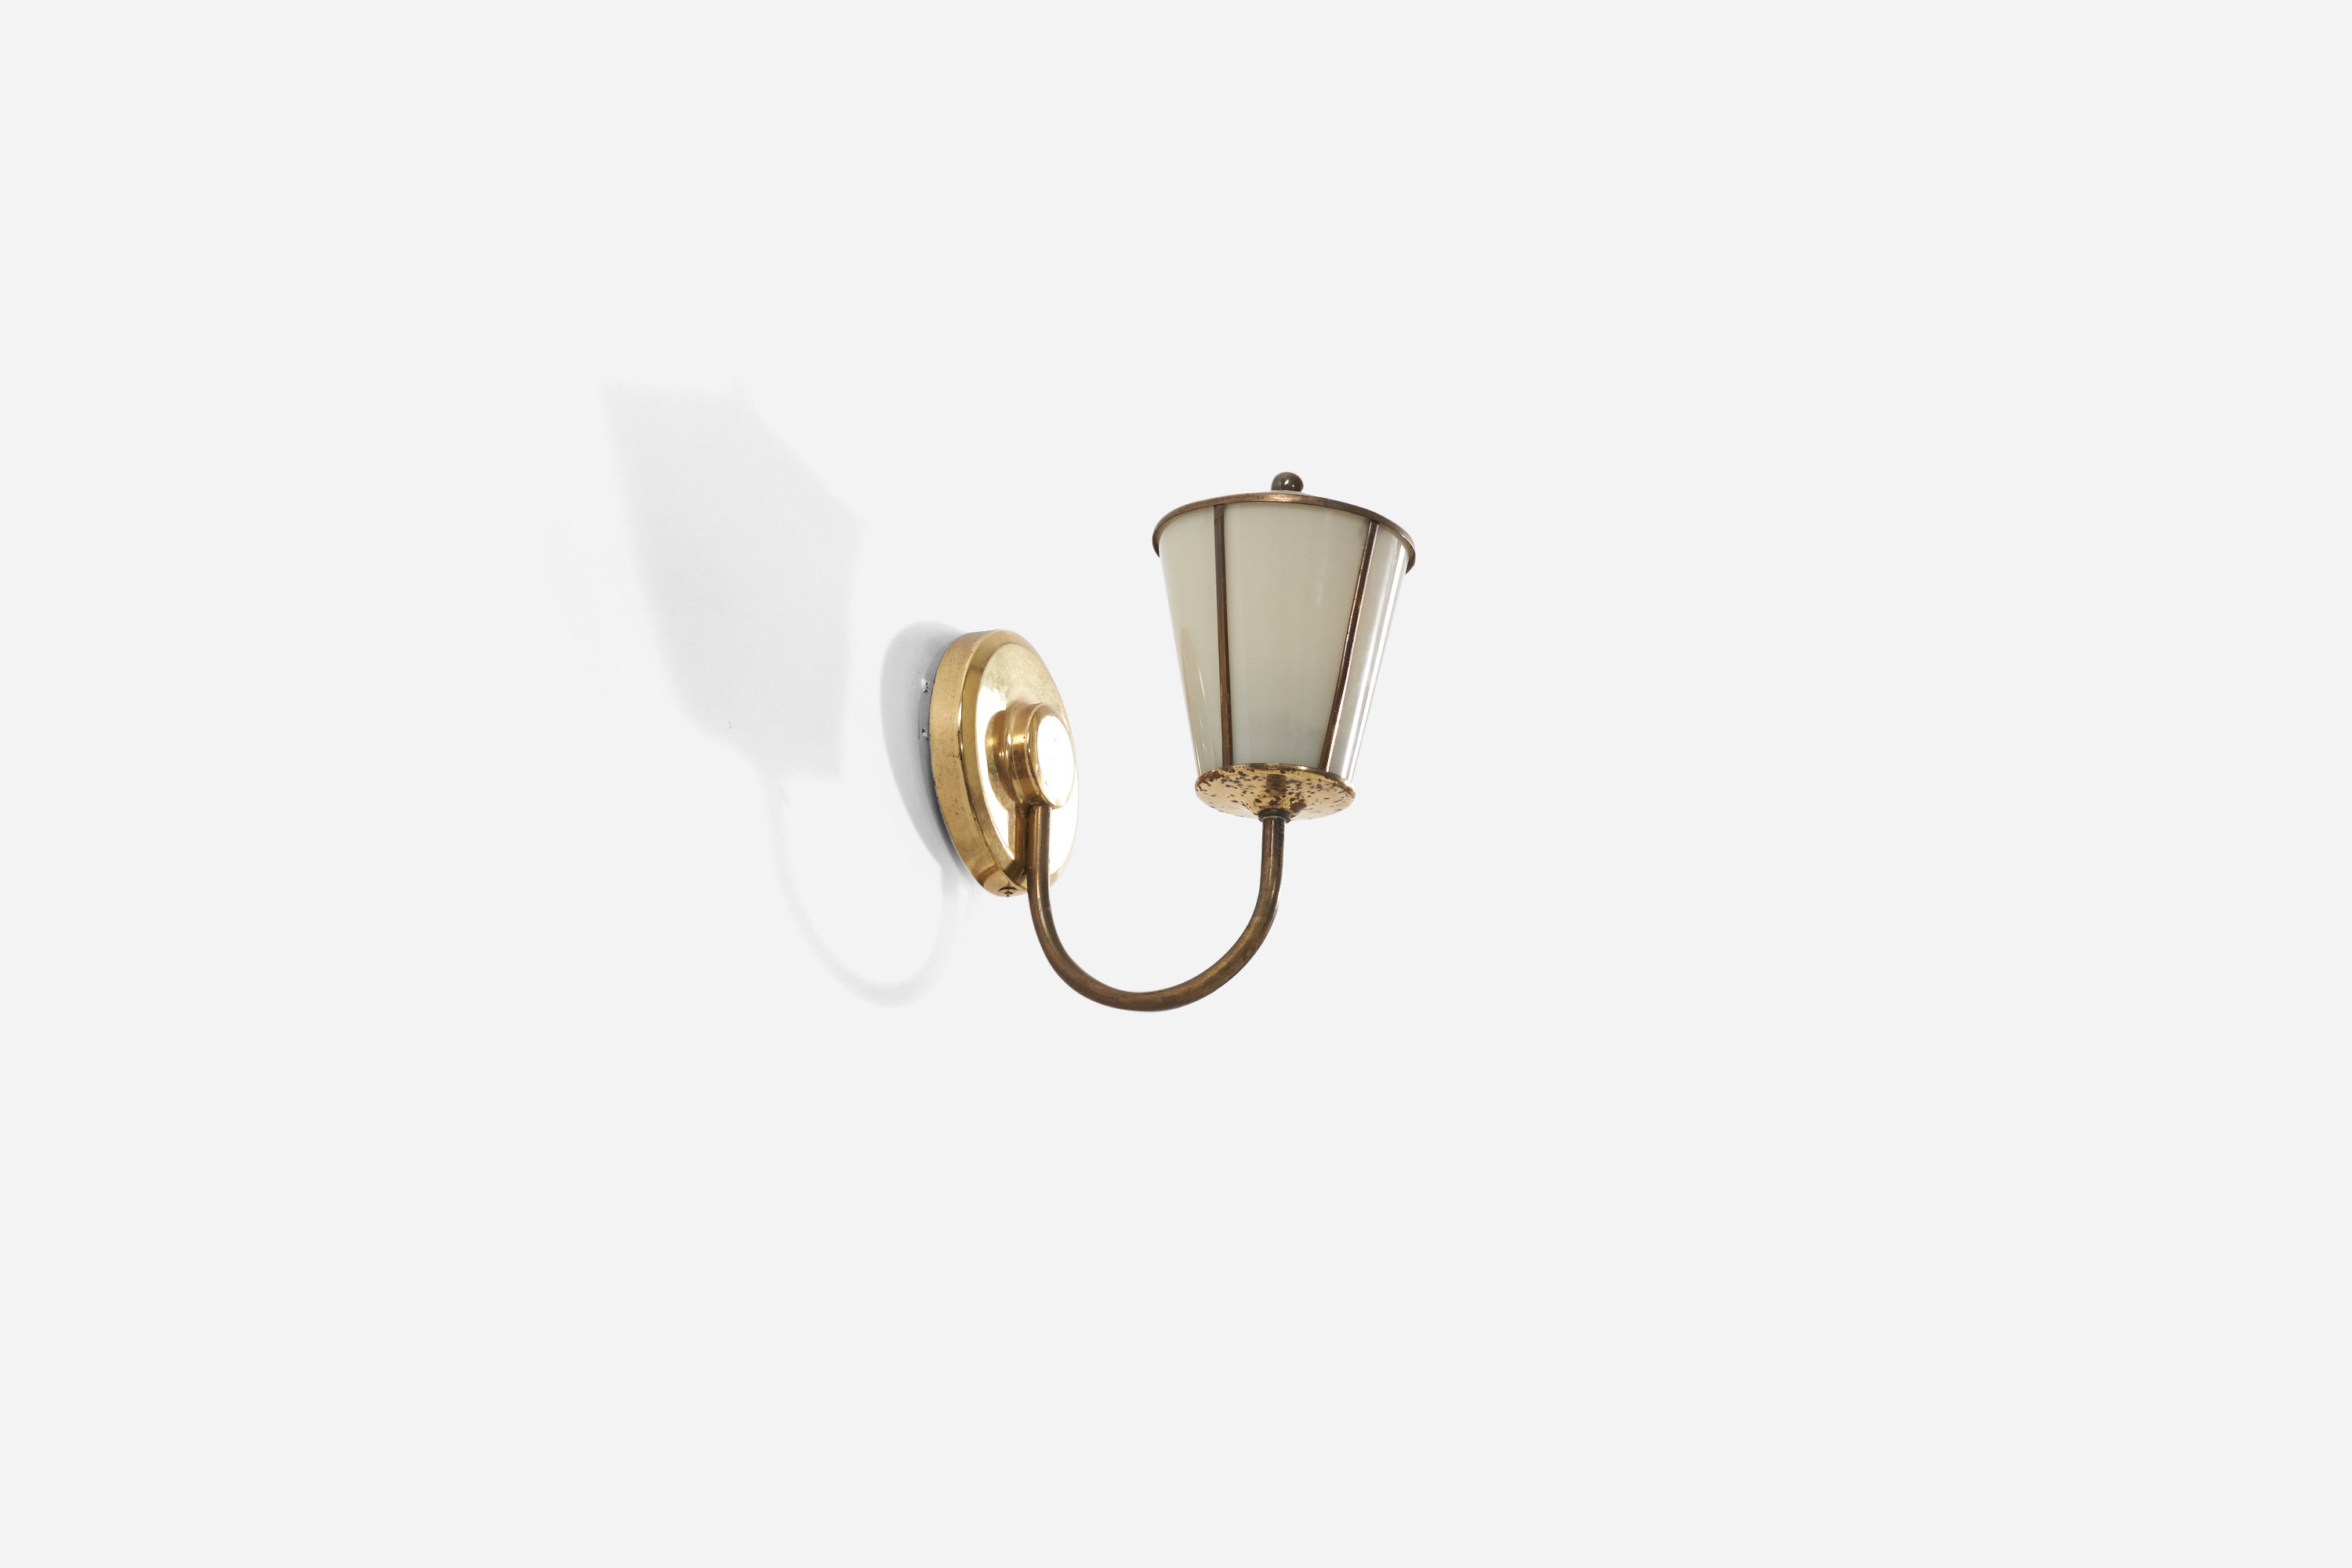 A brass and milk glass wall light / sconce designed and produced in Sweden, 1960s.